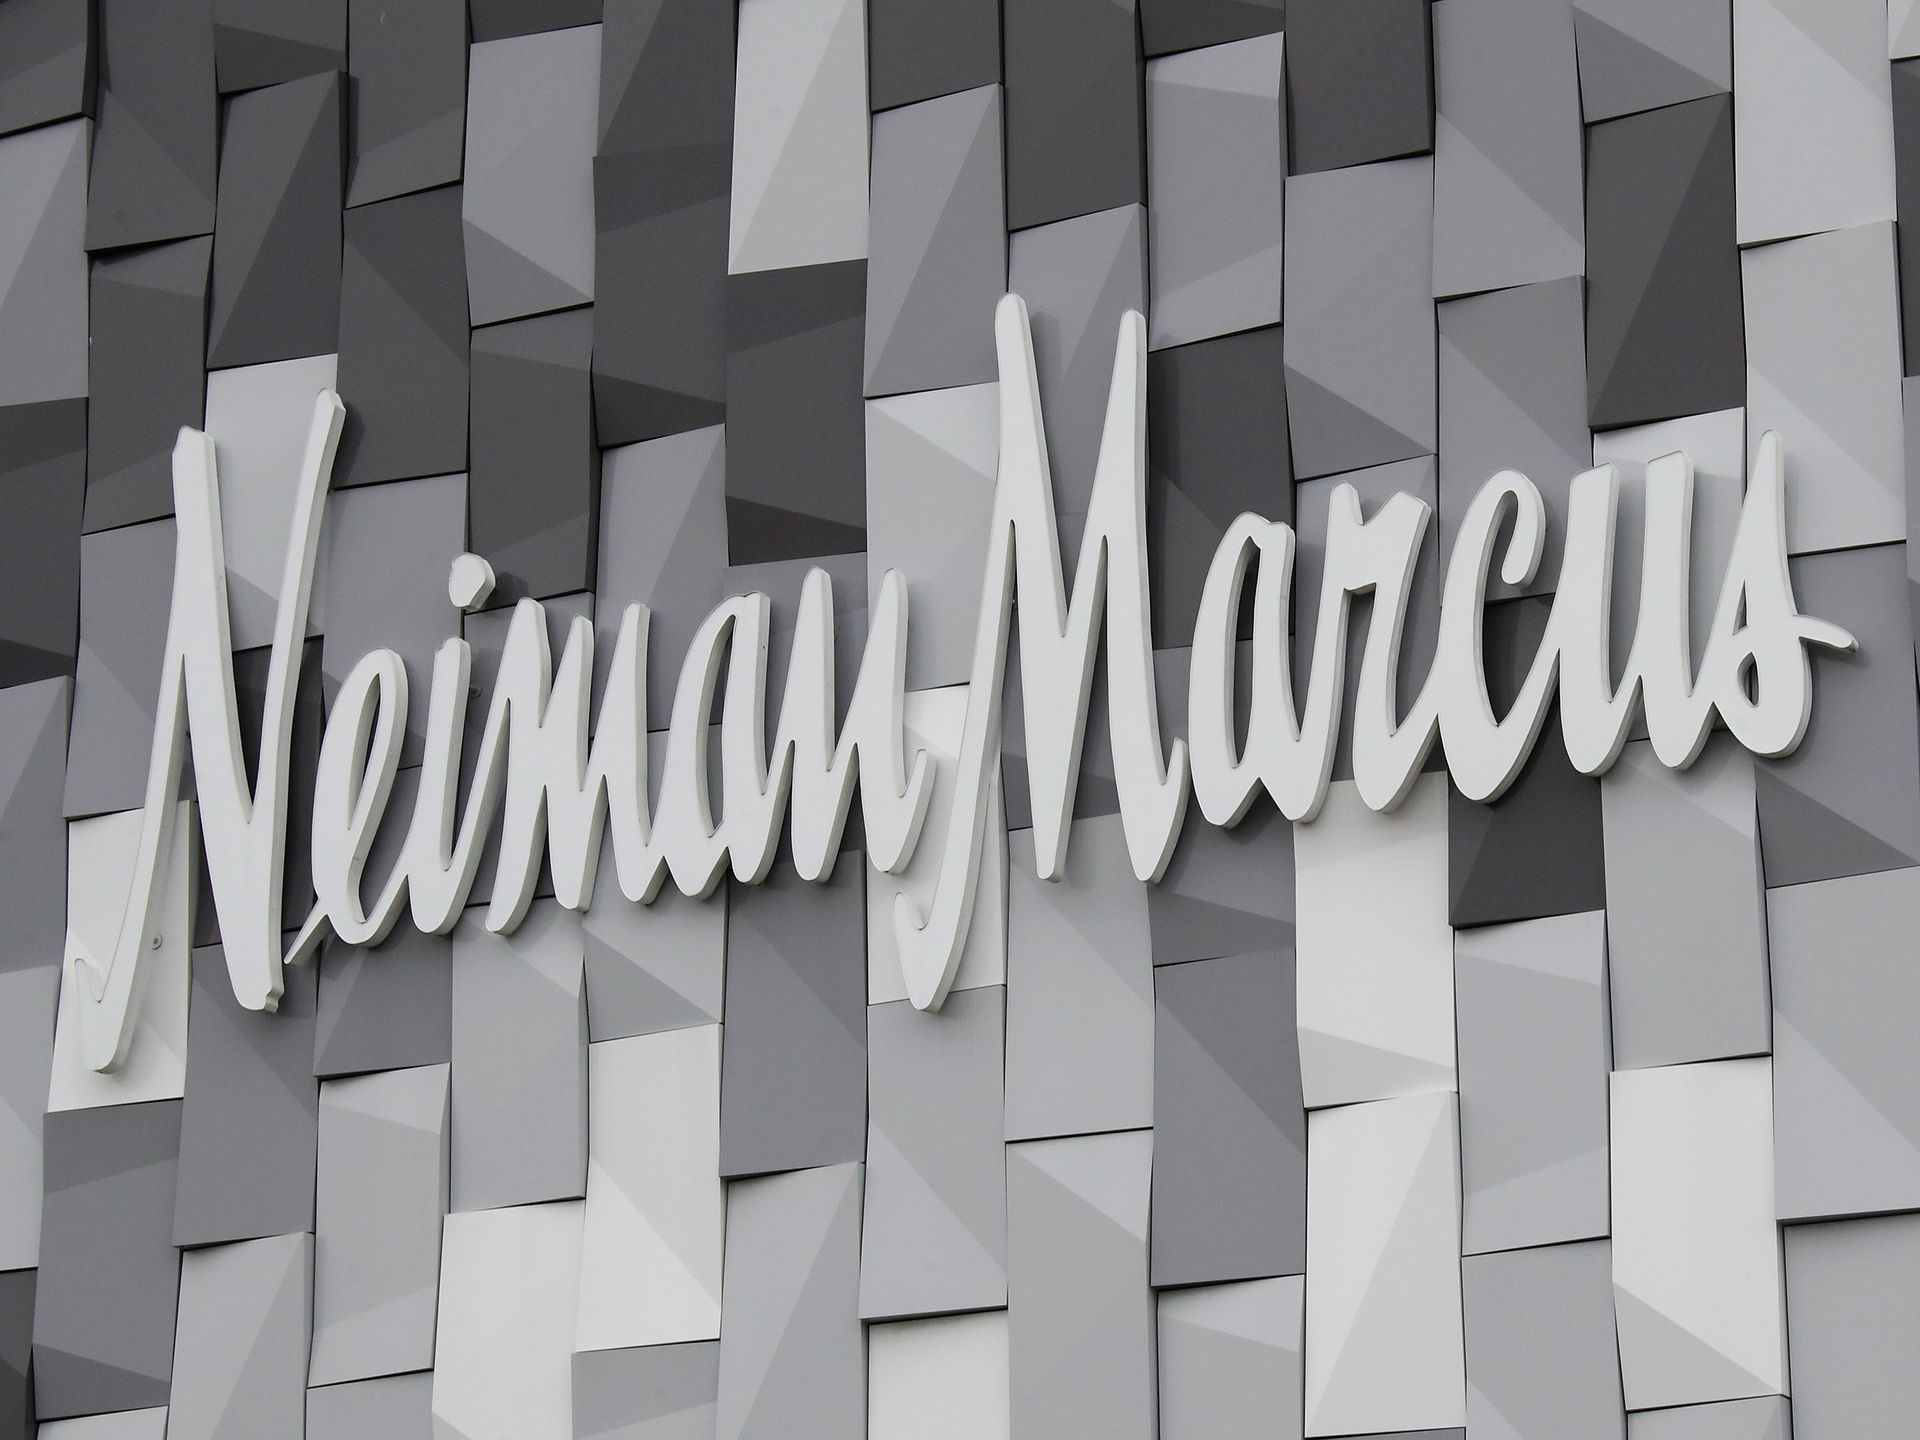 5 things Neiman Marcus discovered about today's luxury shoppers